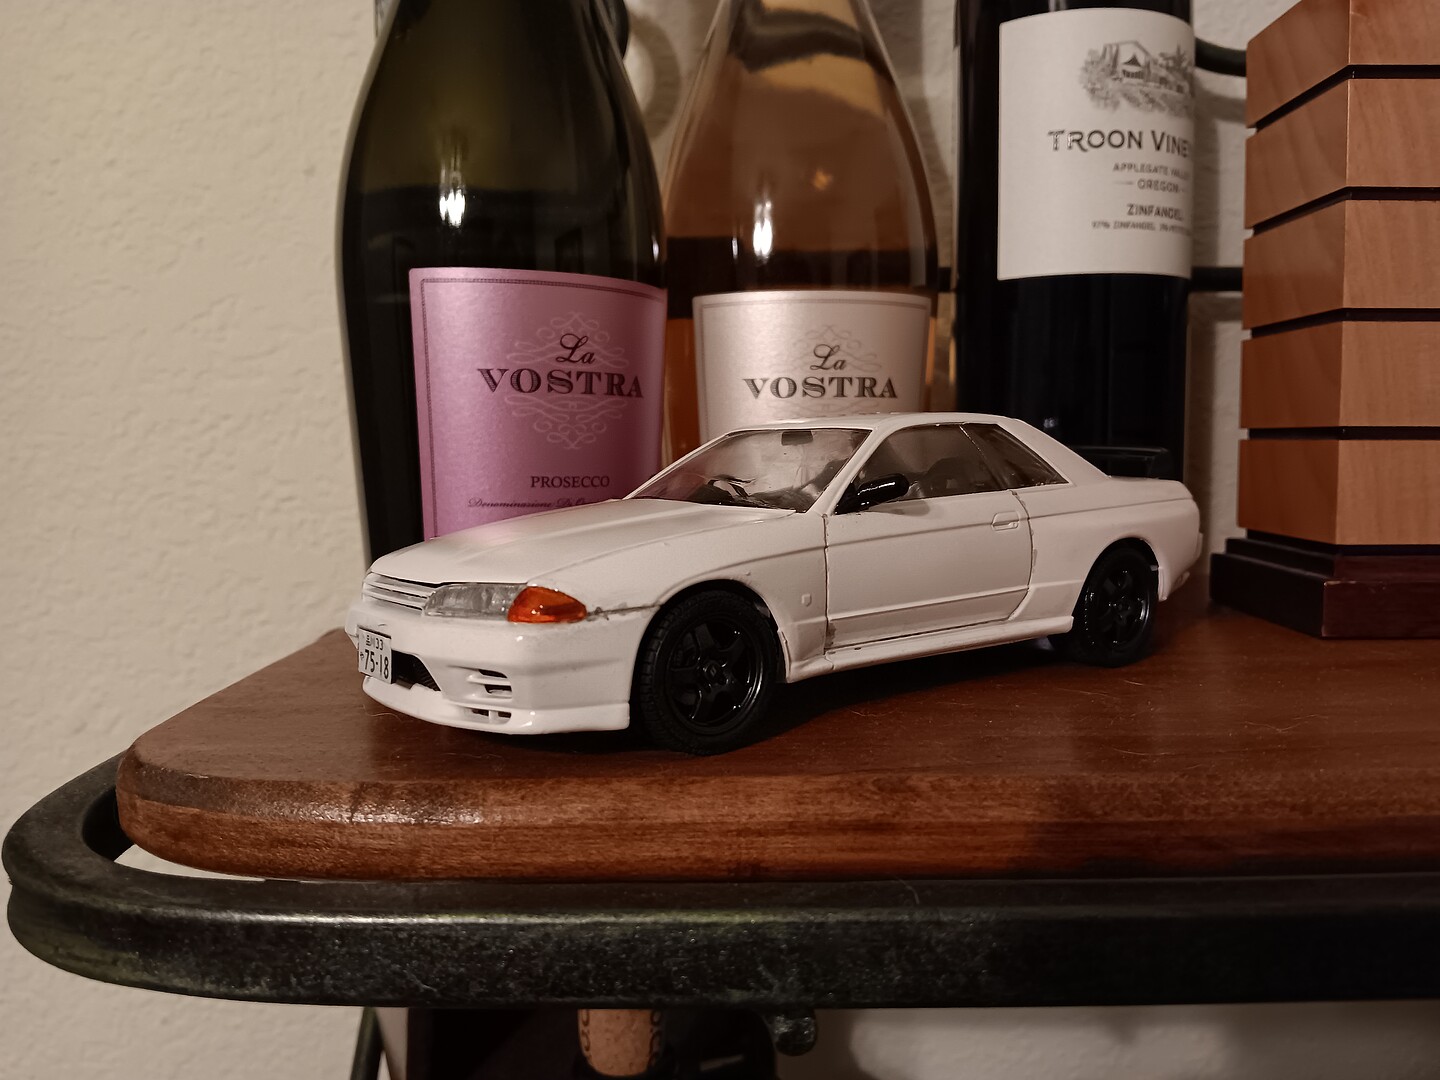 Maquette Tamiya Nissan Skyline GT-R With blistering performance, t